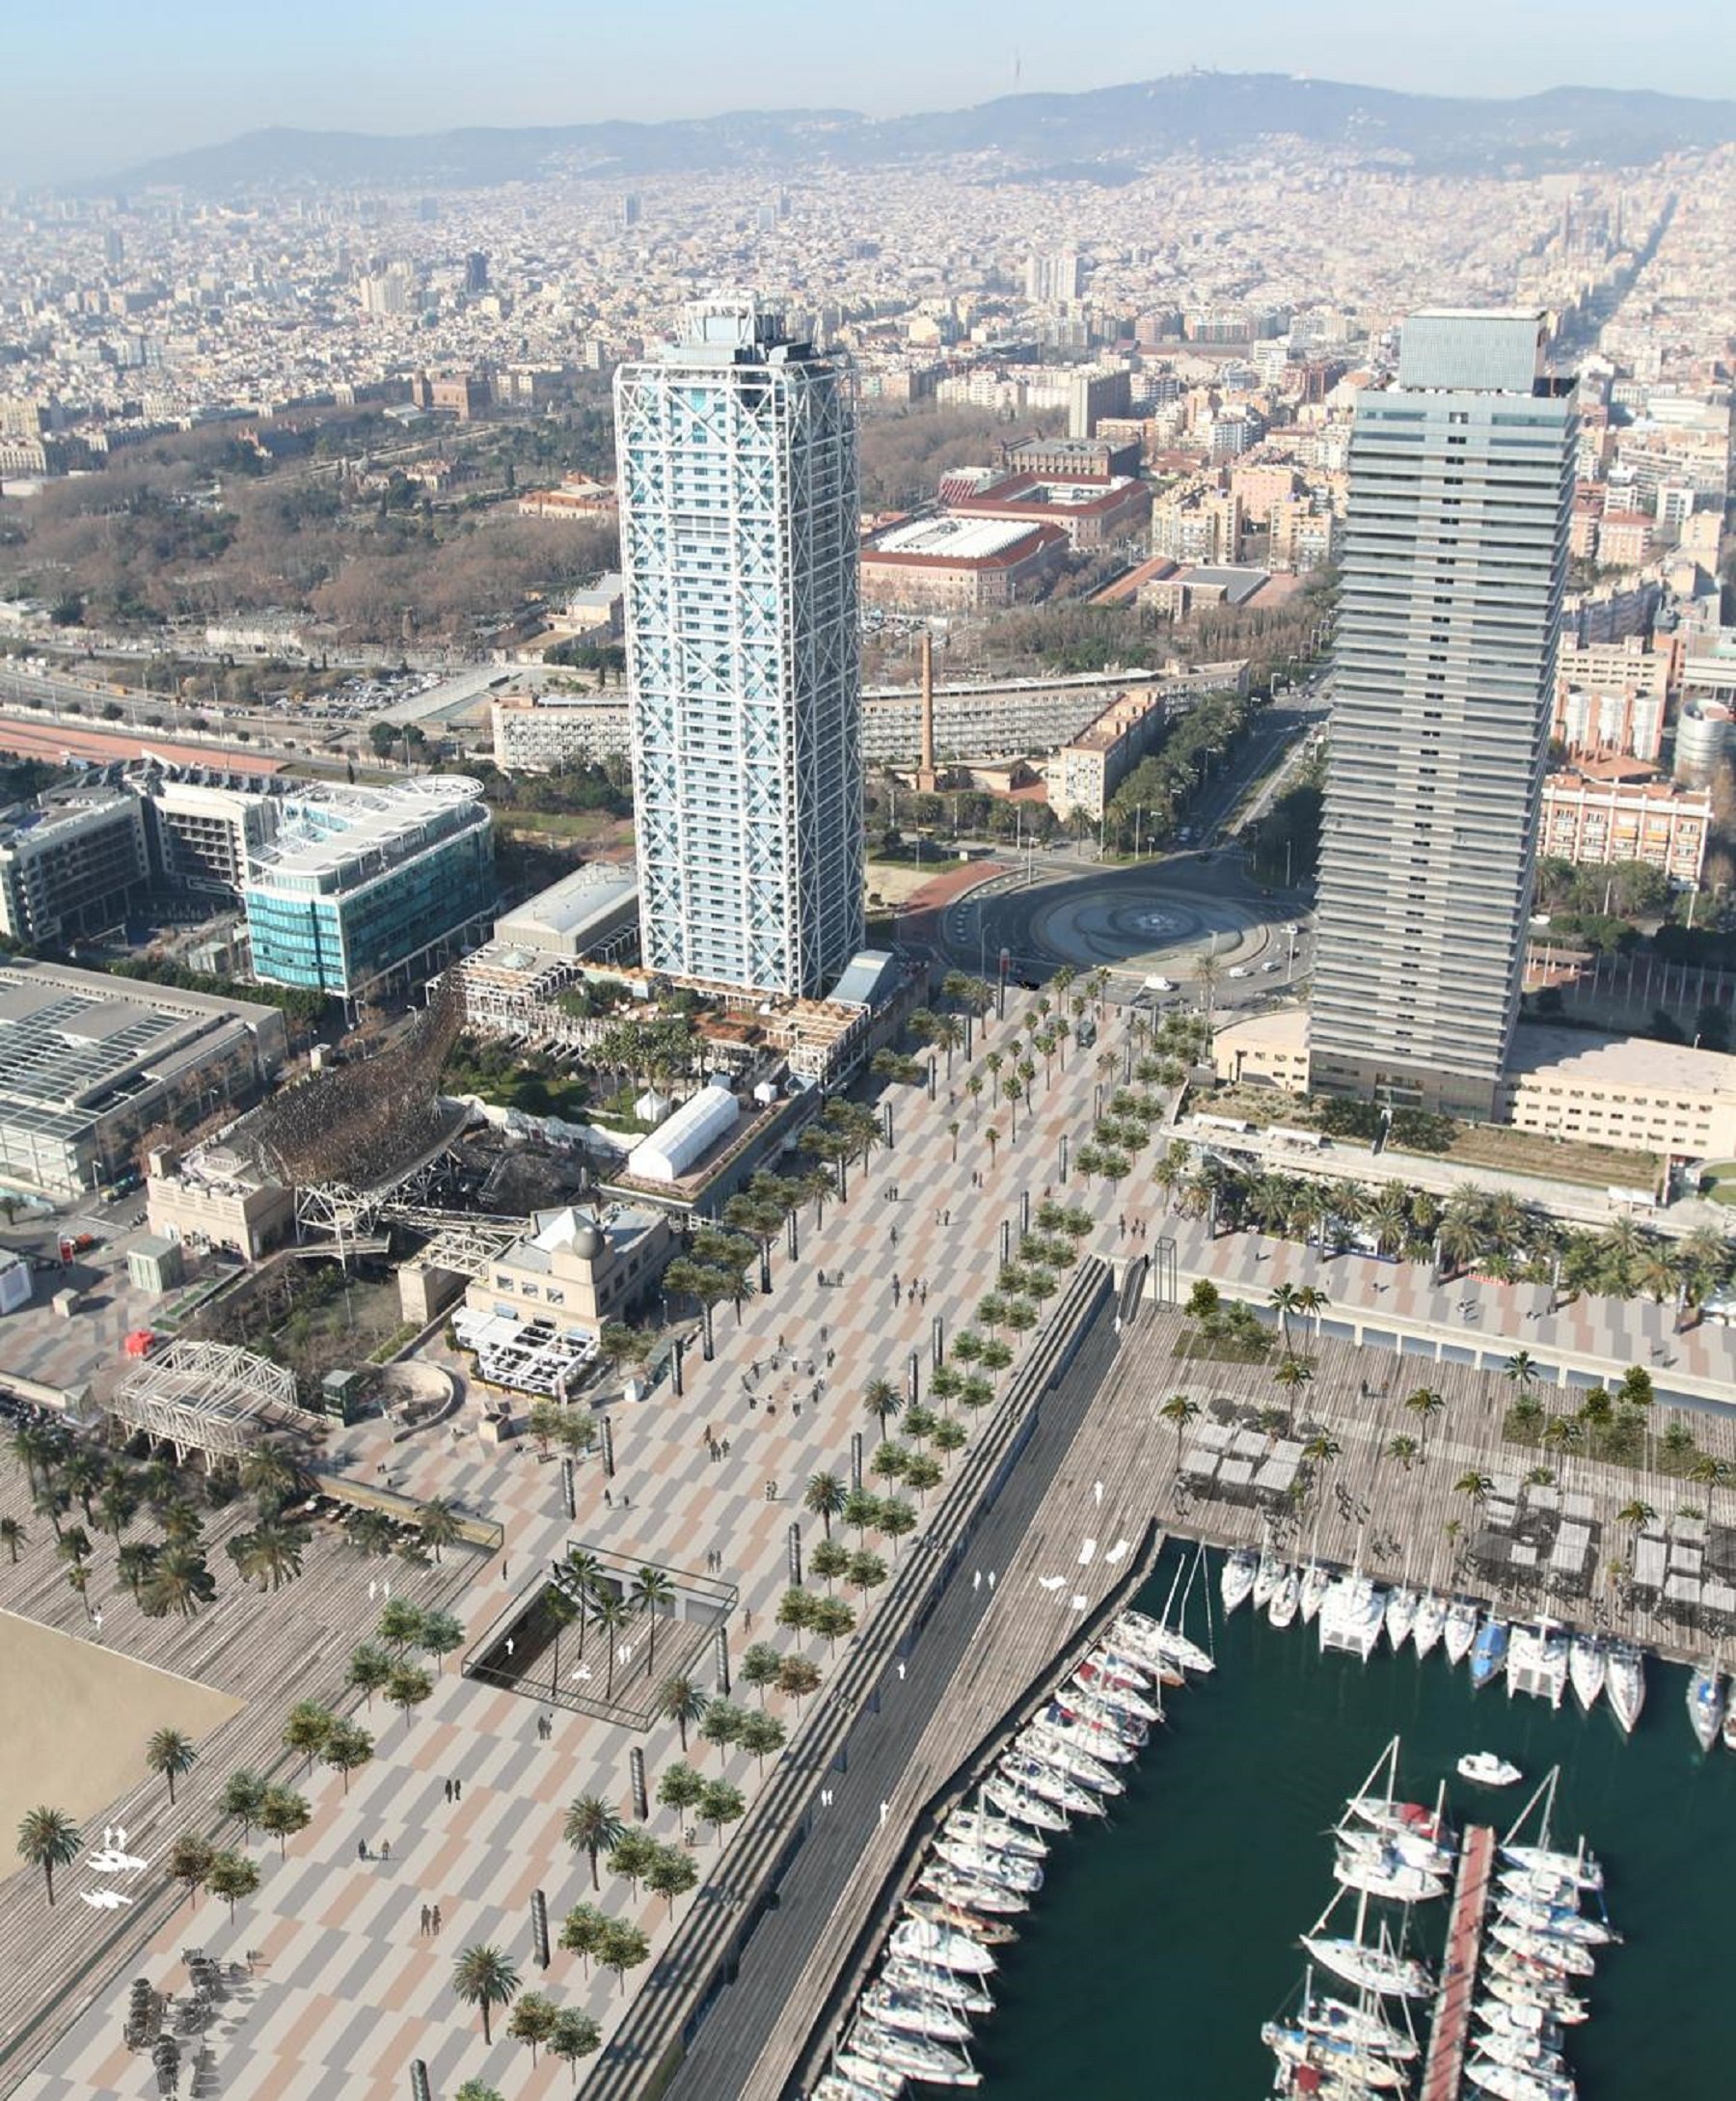 Barcelona residents protest against Colau as part of city beachfront is privatized